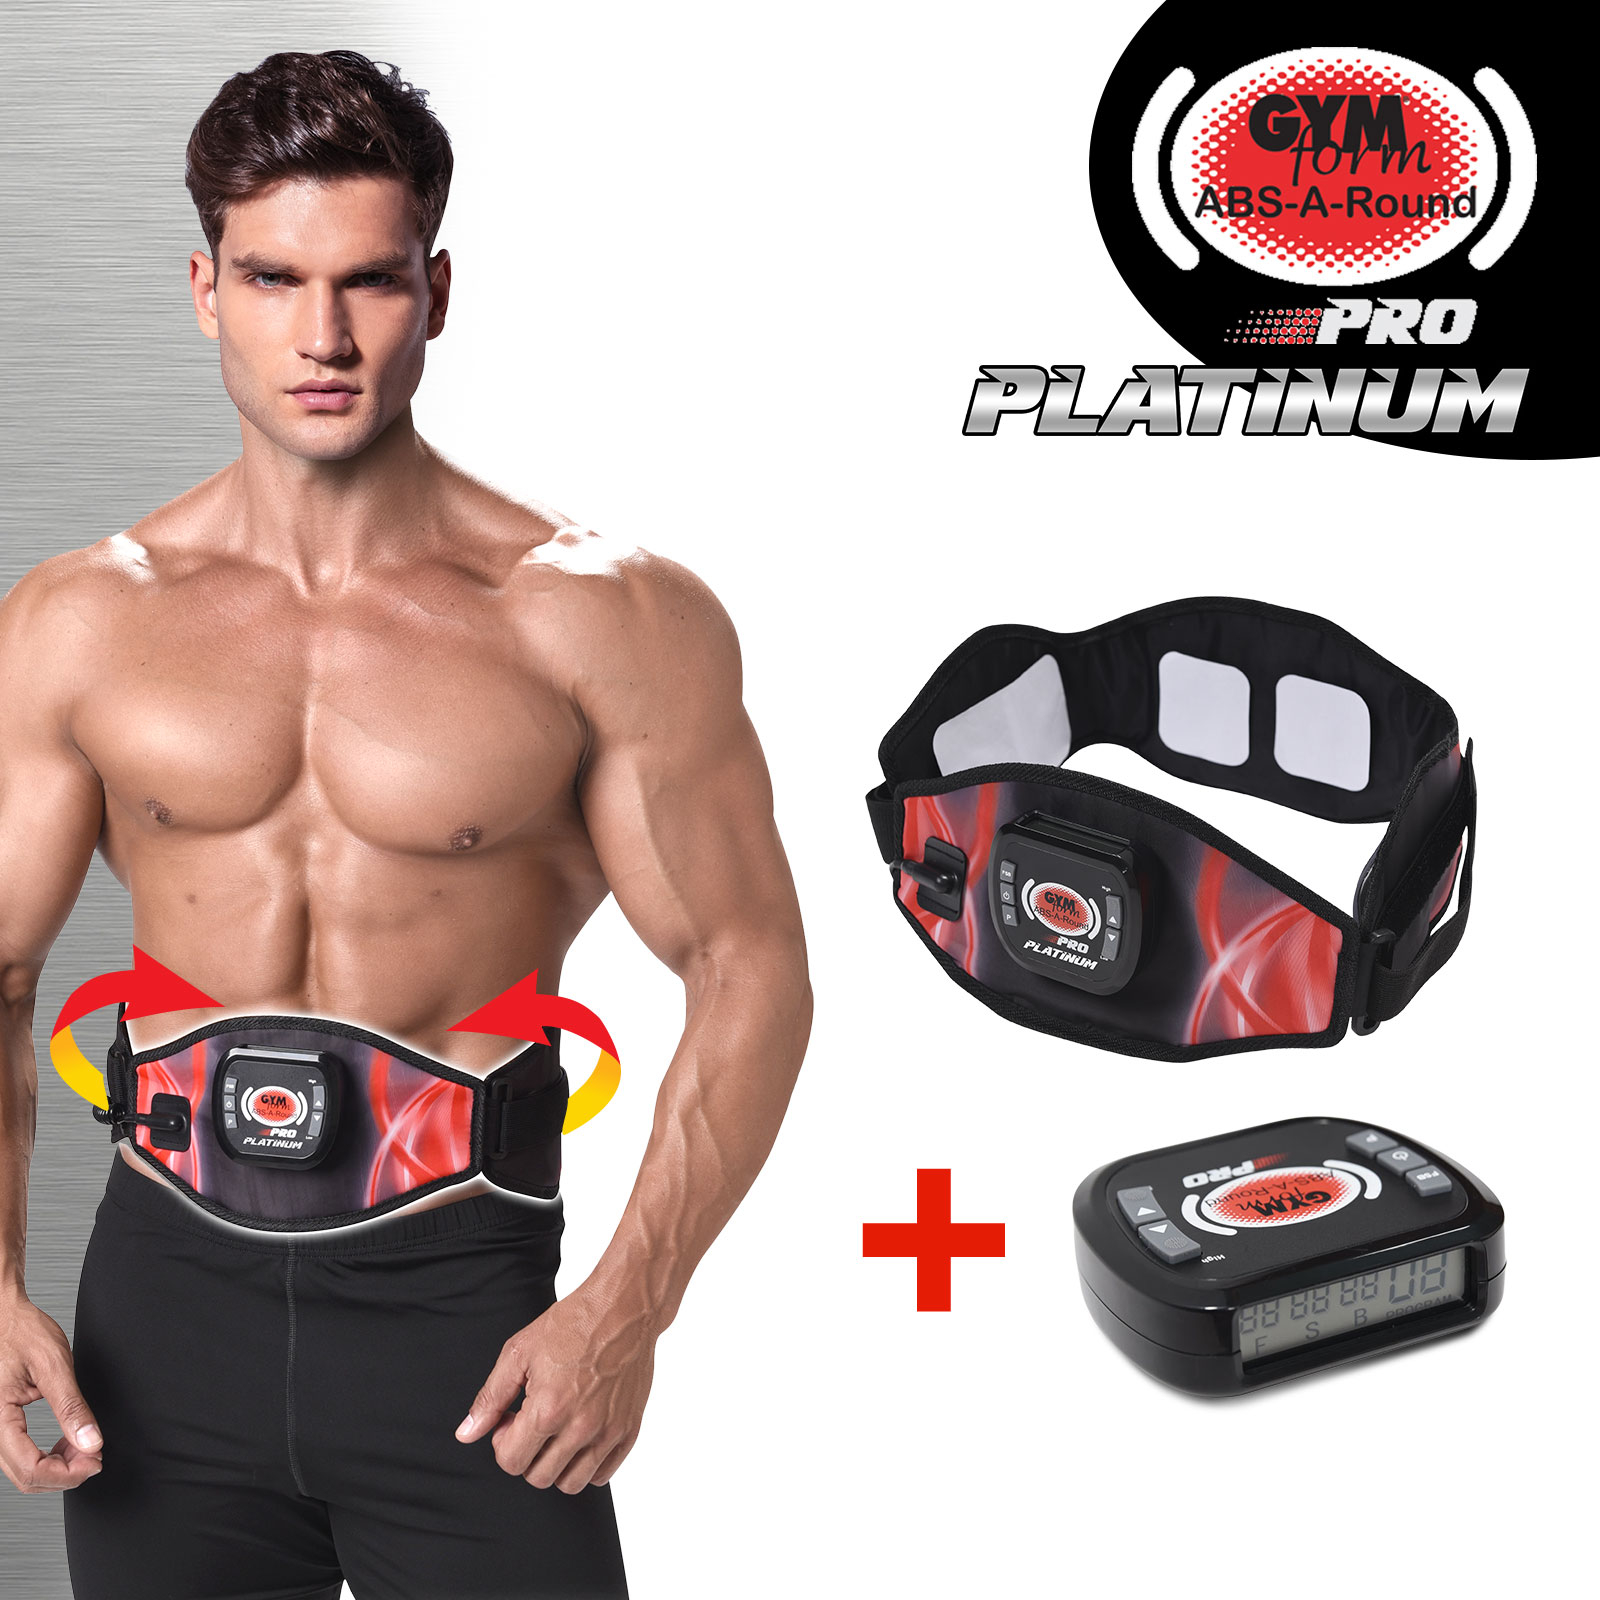 Original from Tv Gymform Abs A Round pro Platinum with 3 New Programs